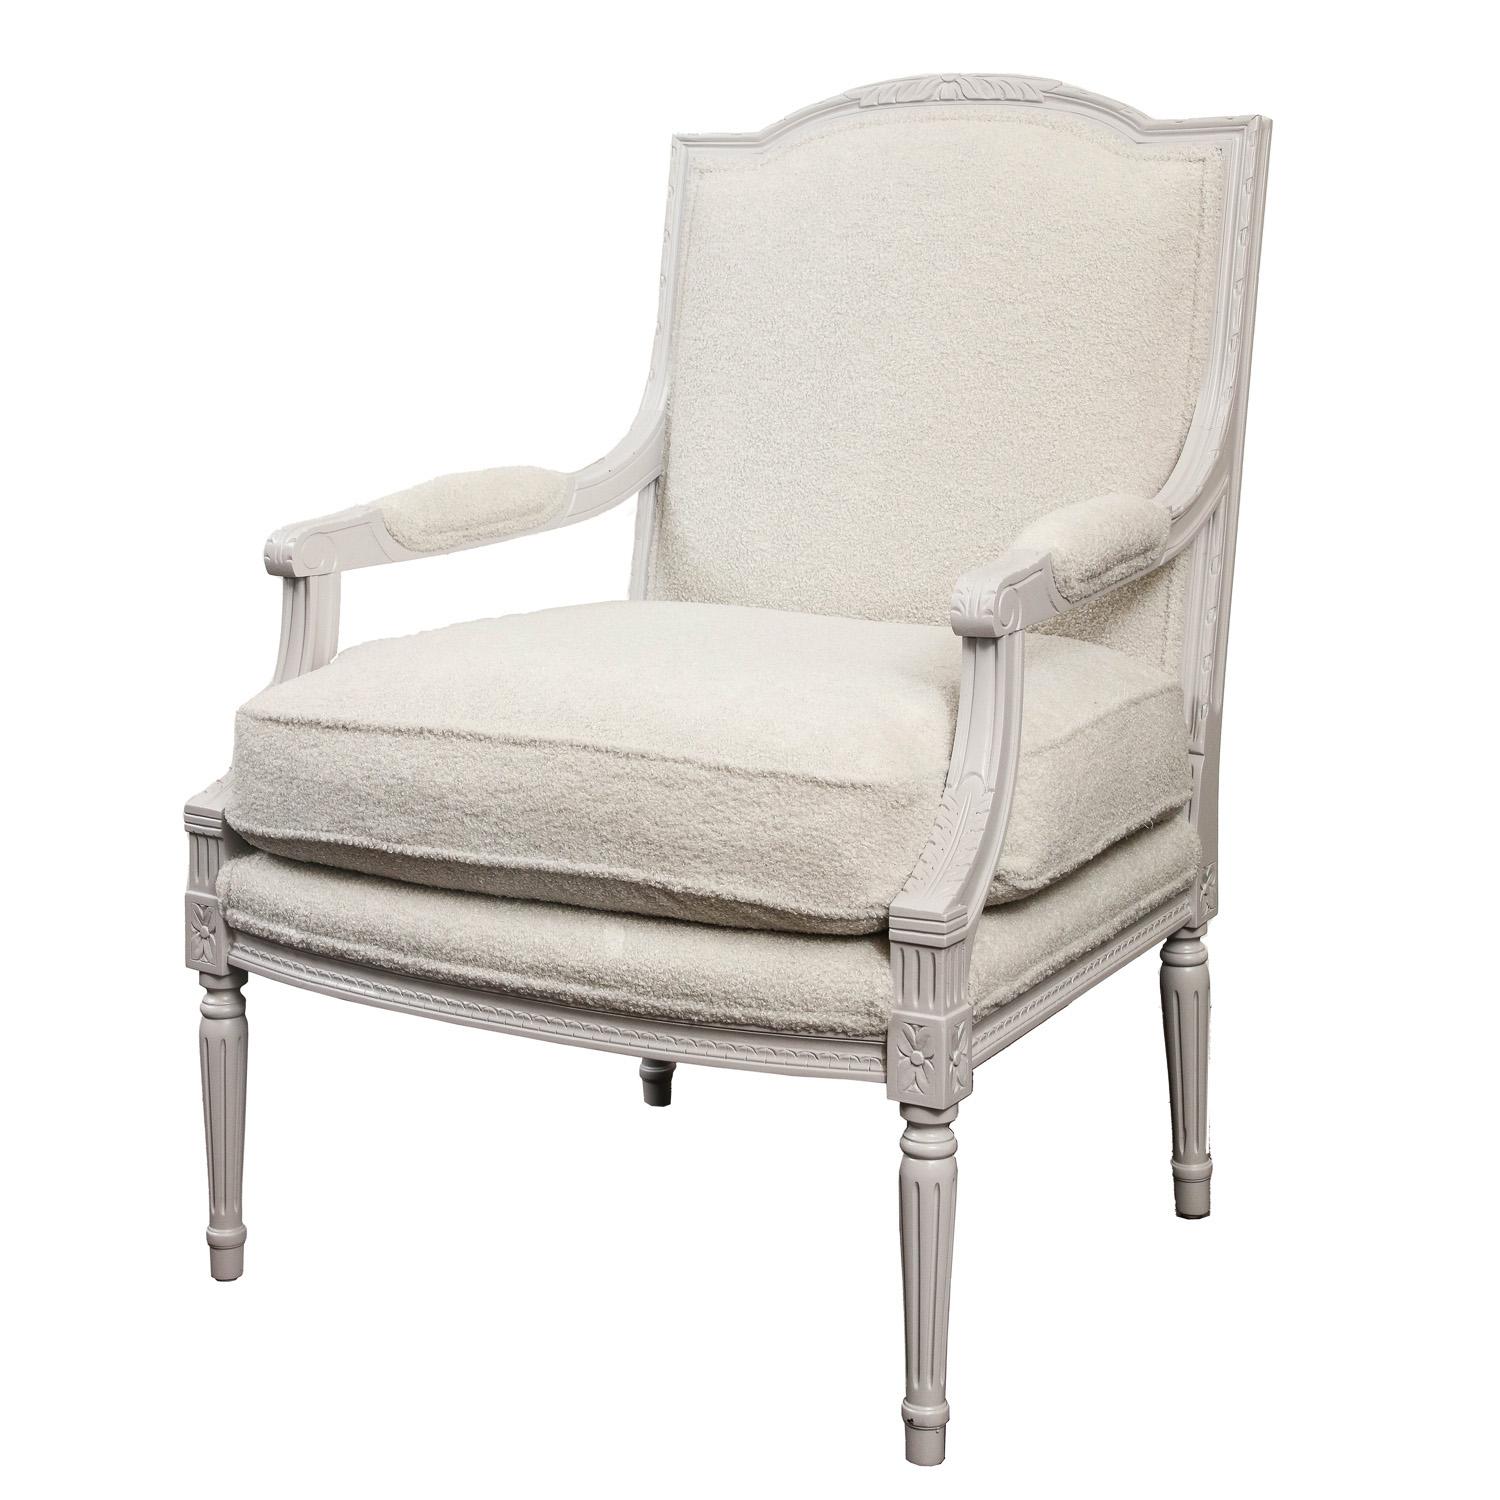 Louis VI style pair of painted arm chairs newly upholstered in pearl color boucle fabric.